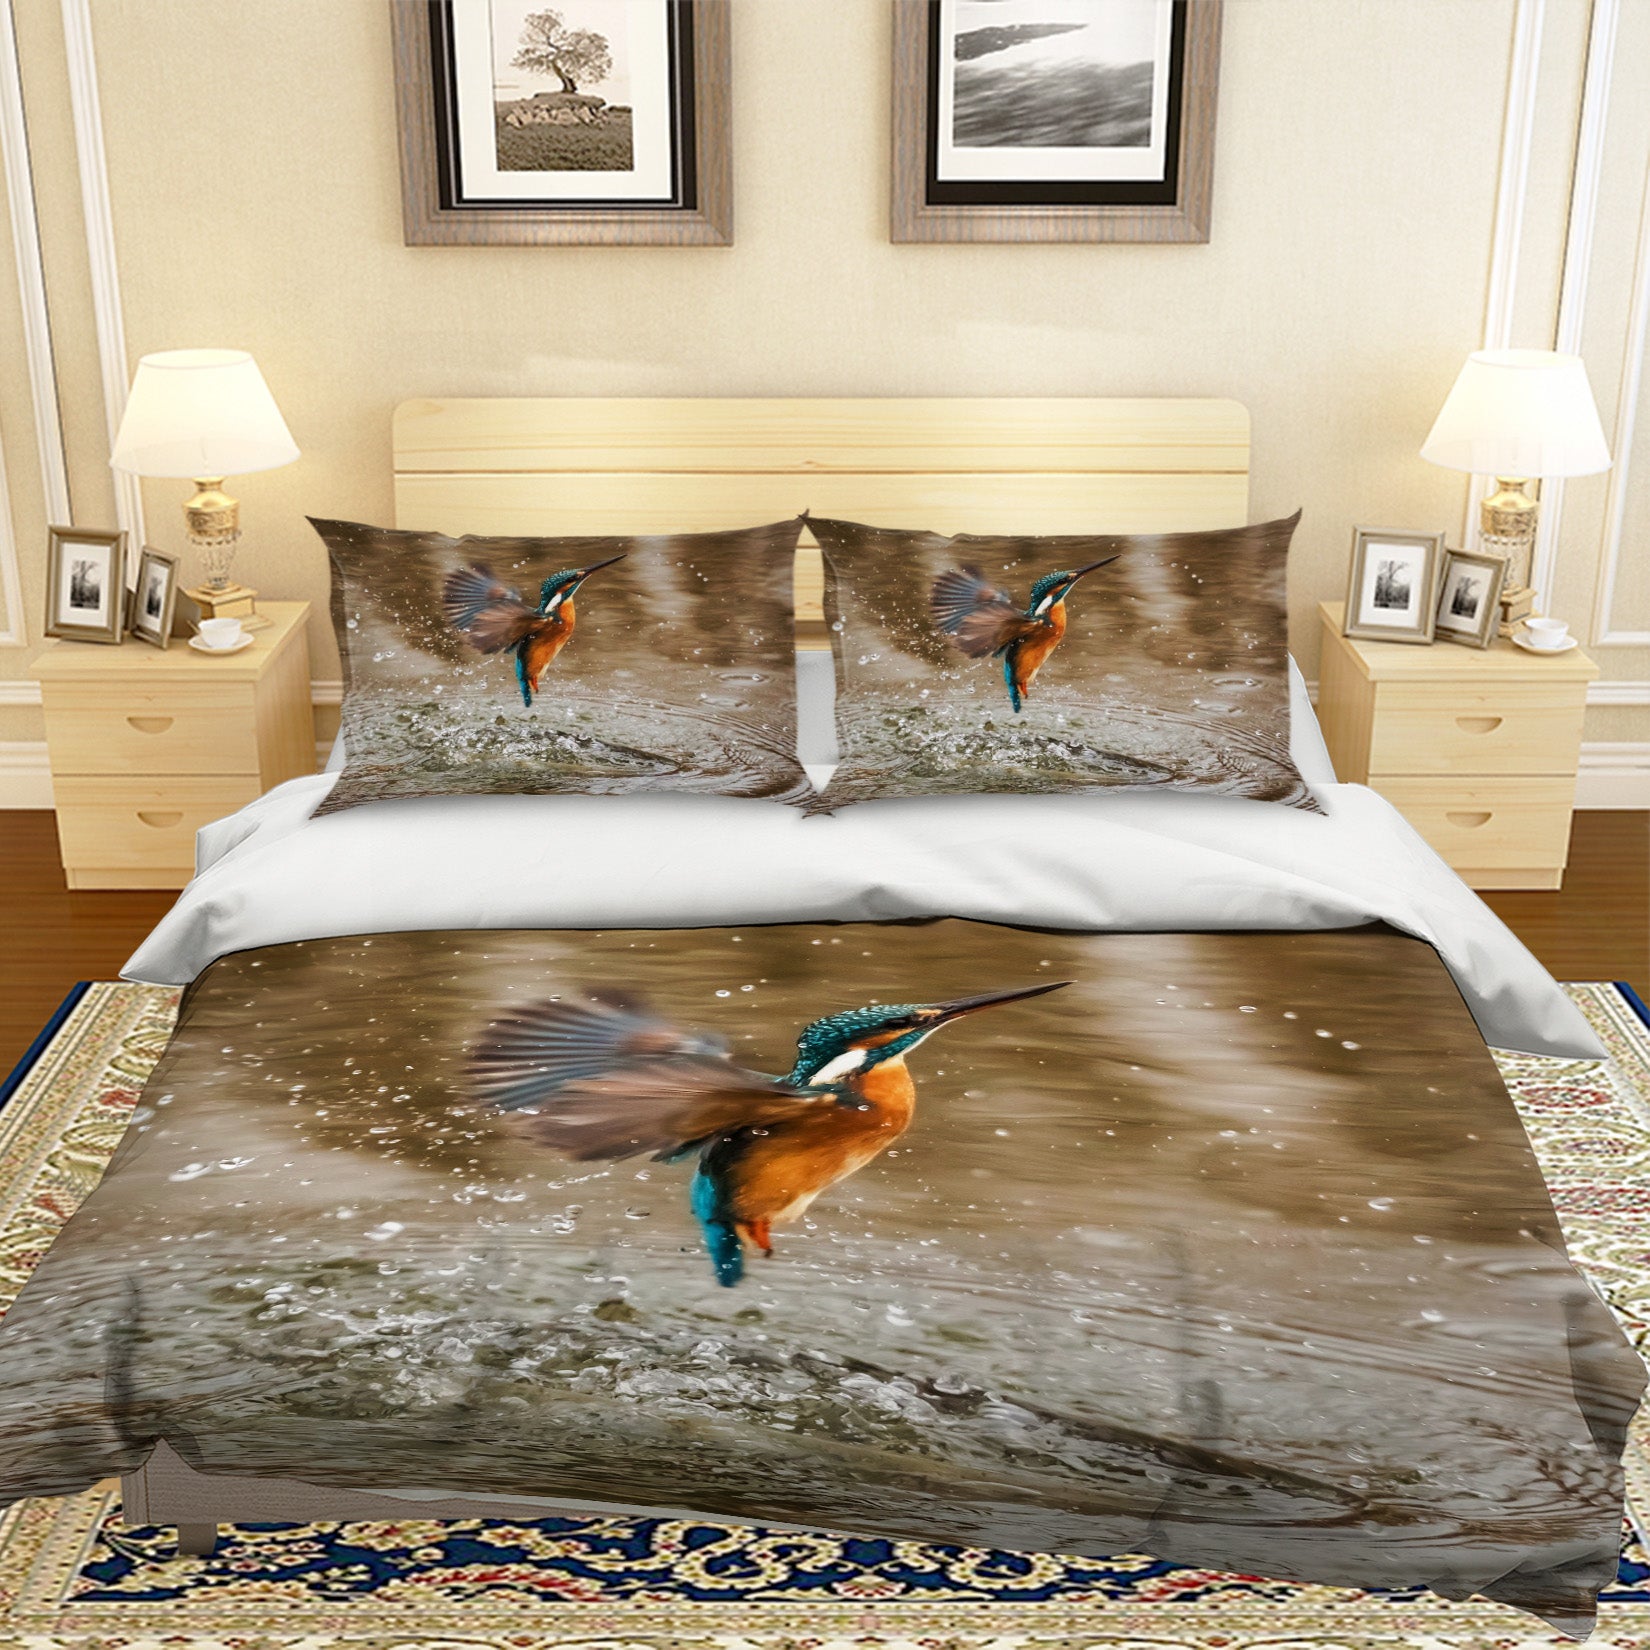 3D River Kingfisher 073 Bed Pillowcases Quilt